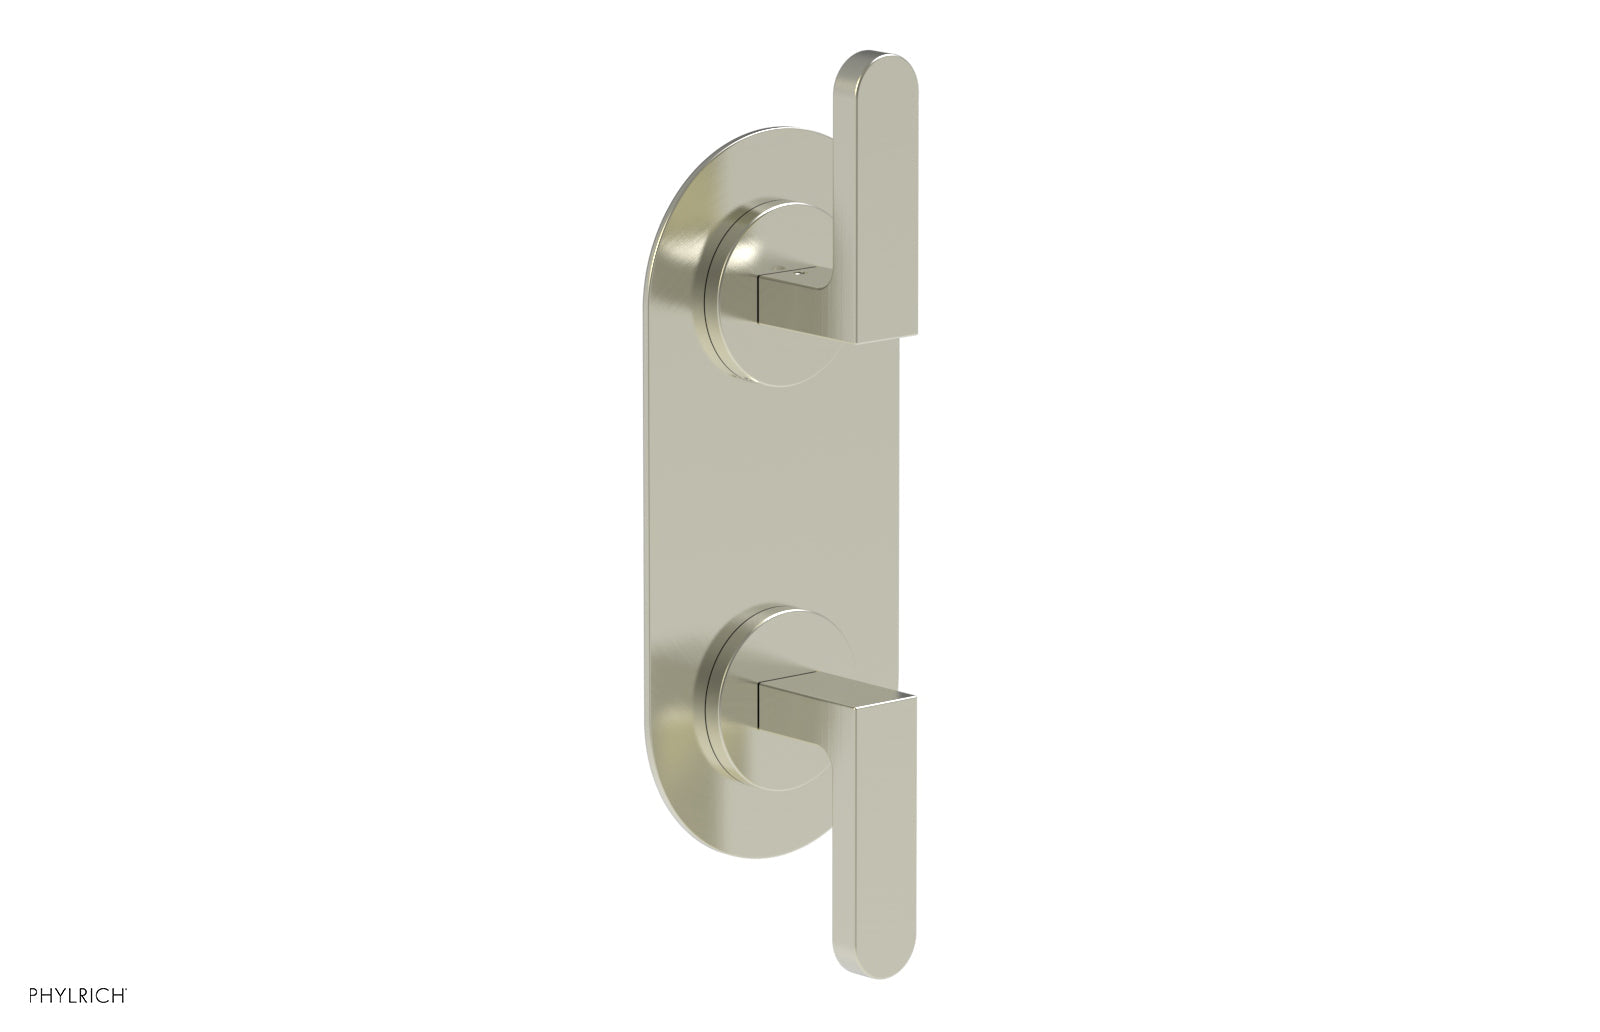 Phylrich ROND 1/2" Thermostatic Valve with Volume Control or Diverter, Lever Handles